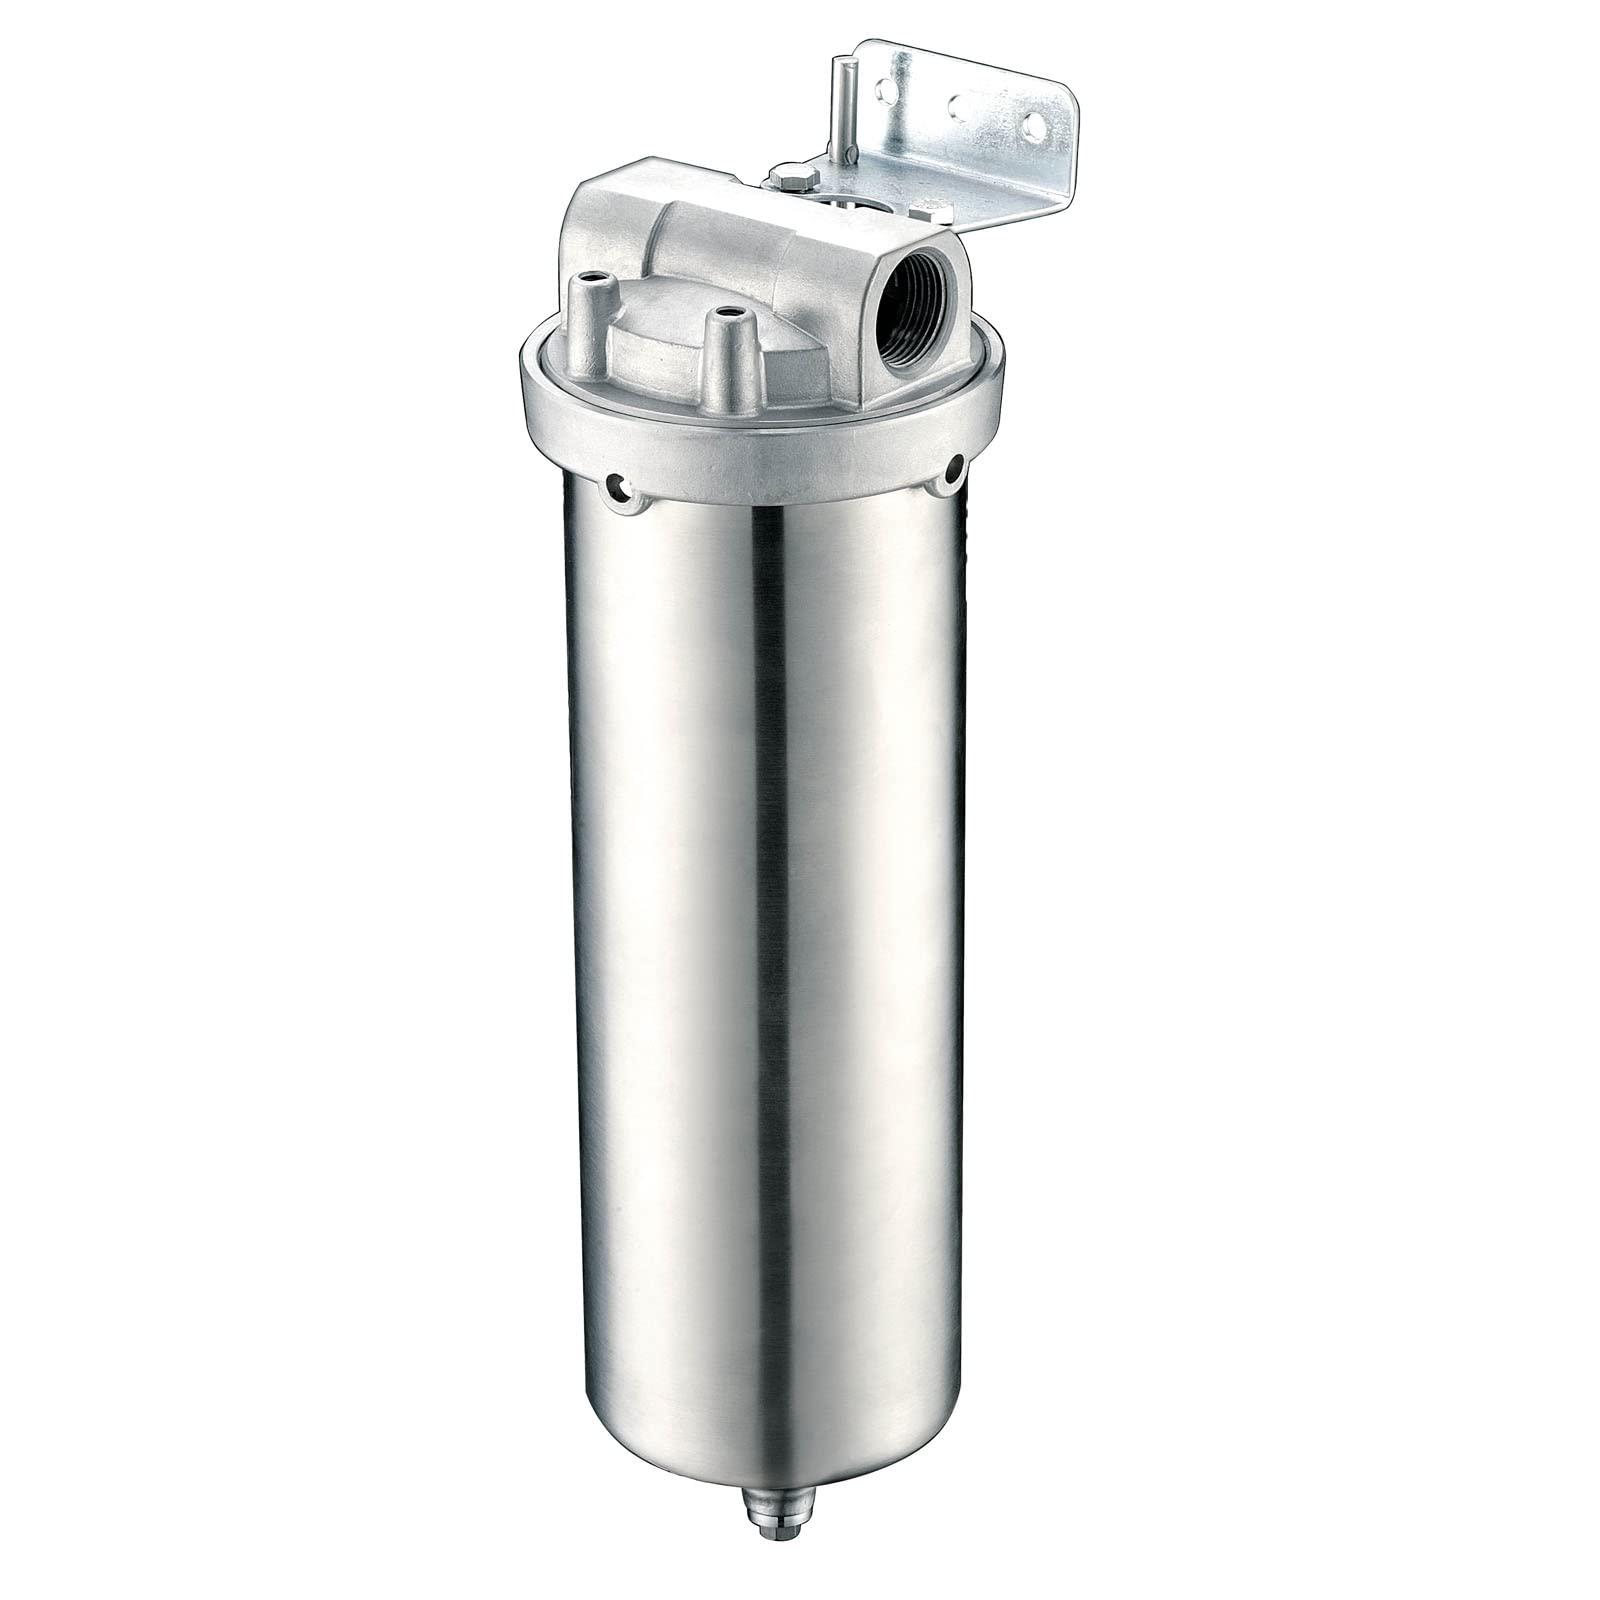 amwater nsf stainless steel filter housing for 10" filter cartridge, 3/4" npt water filter housing for whole house water puri